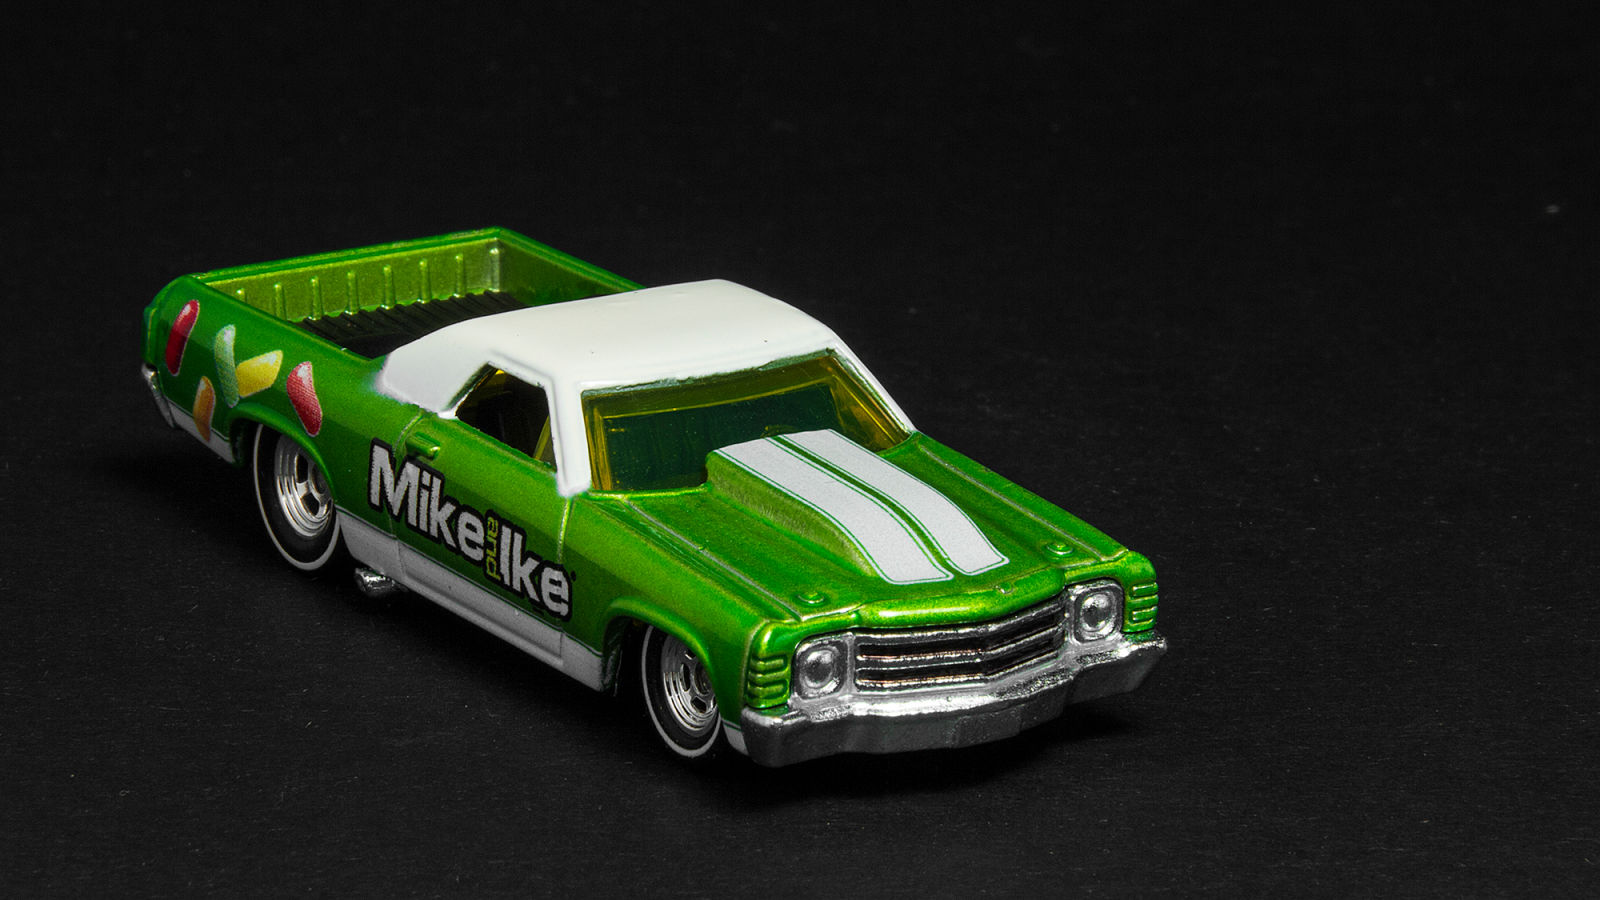 Illustration for article titled Truckin Thursday - Mike and Ike 71 El Camino